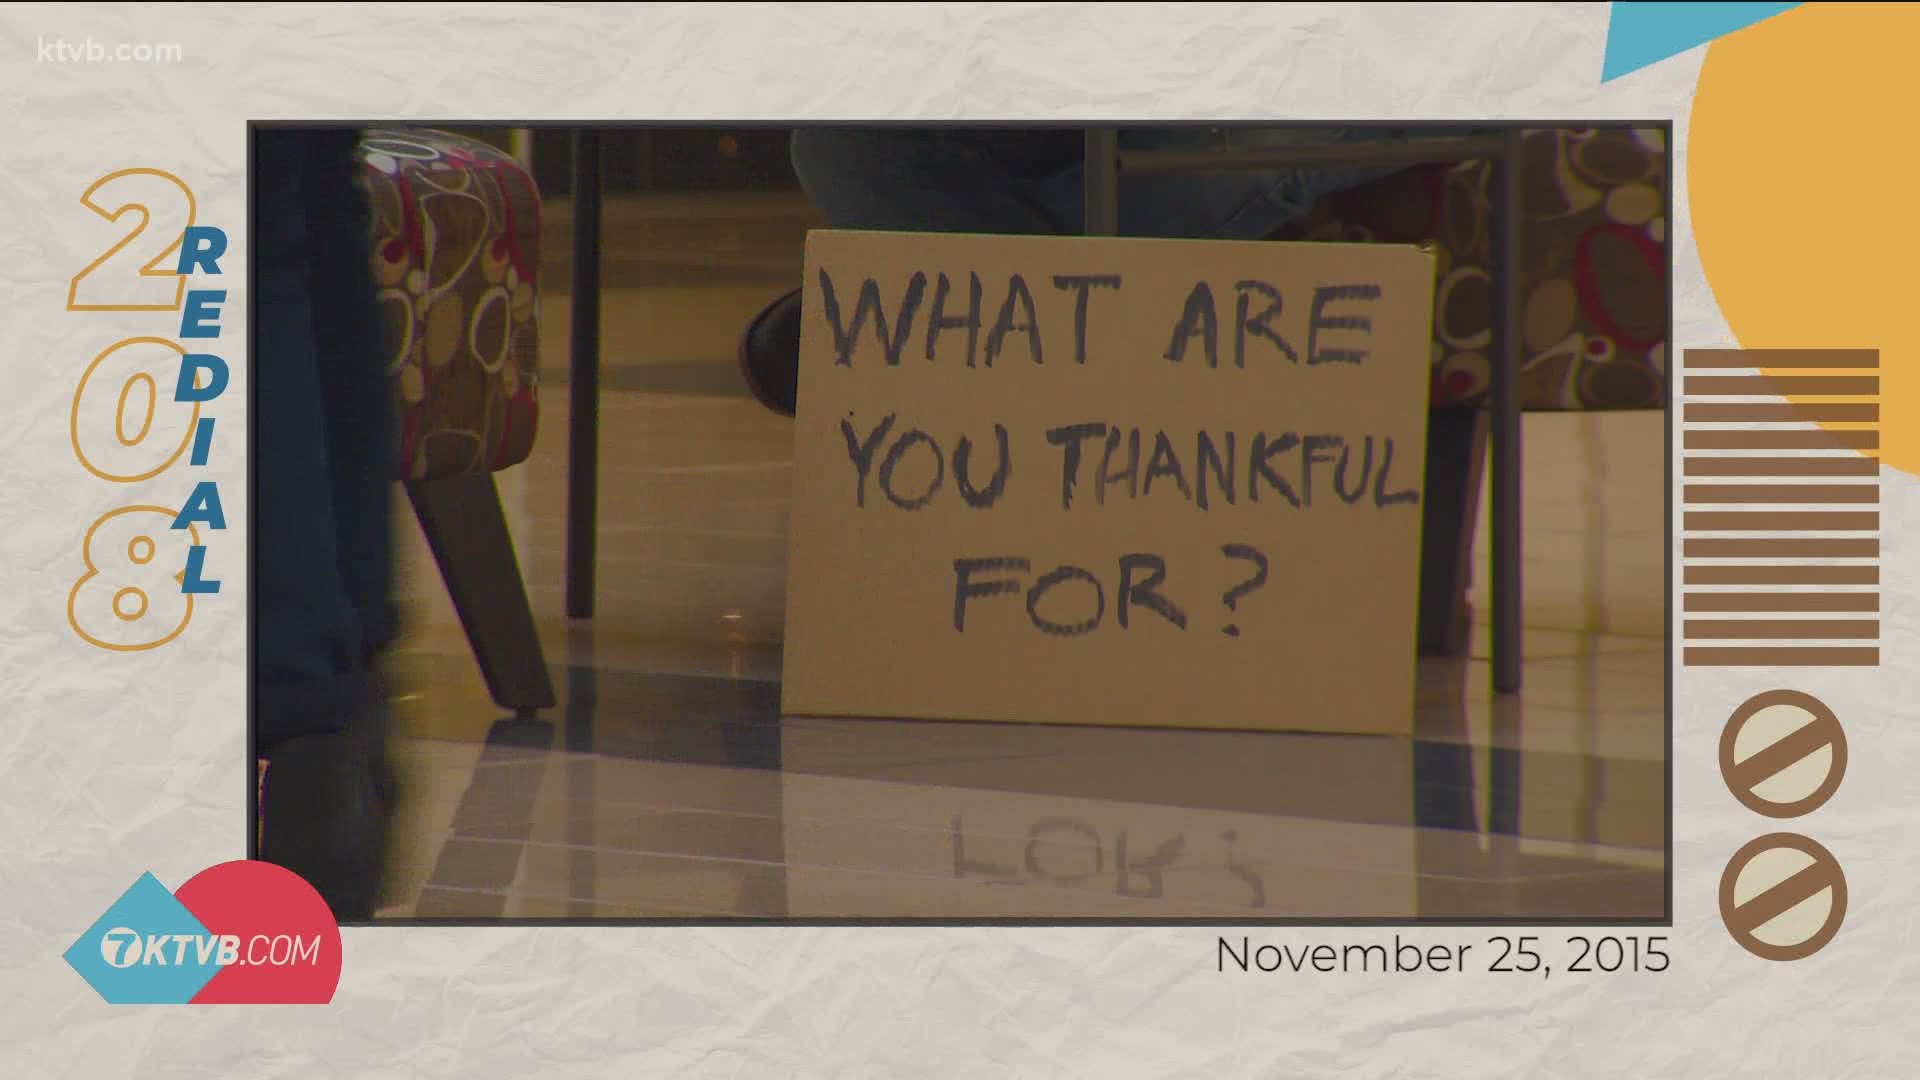 On Nov. 25, 2015, Brian Holmes asked people at the Boise Towne Square what they were thankful for.